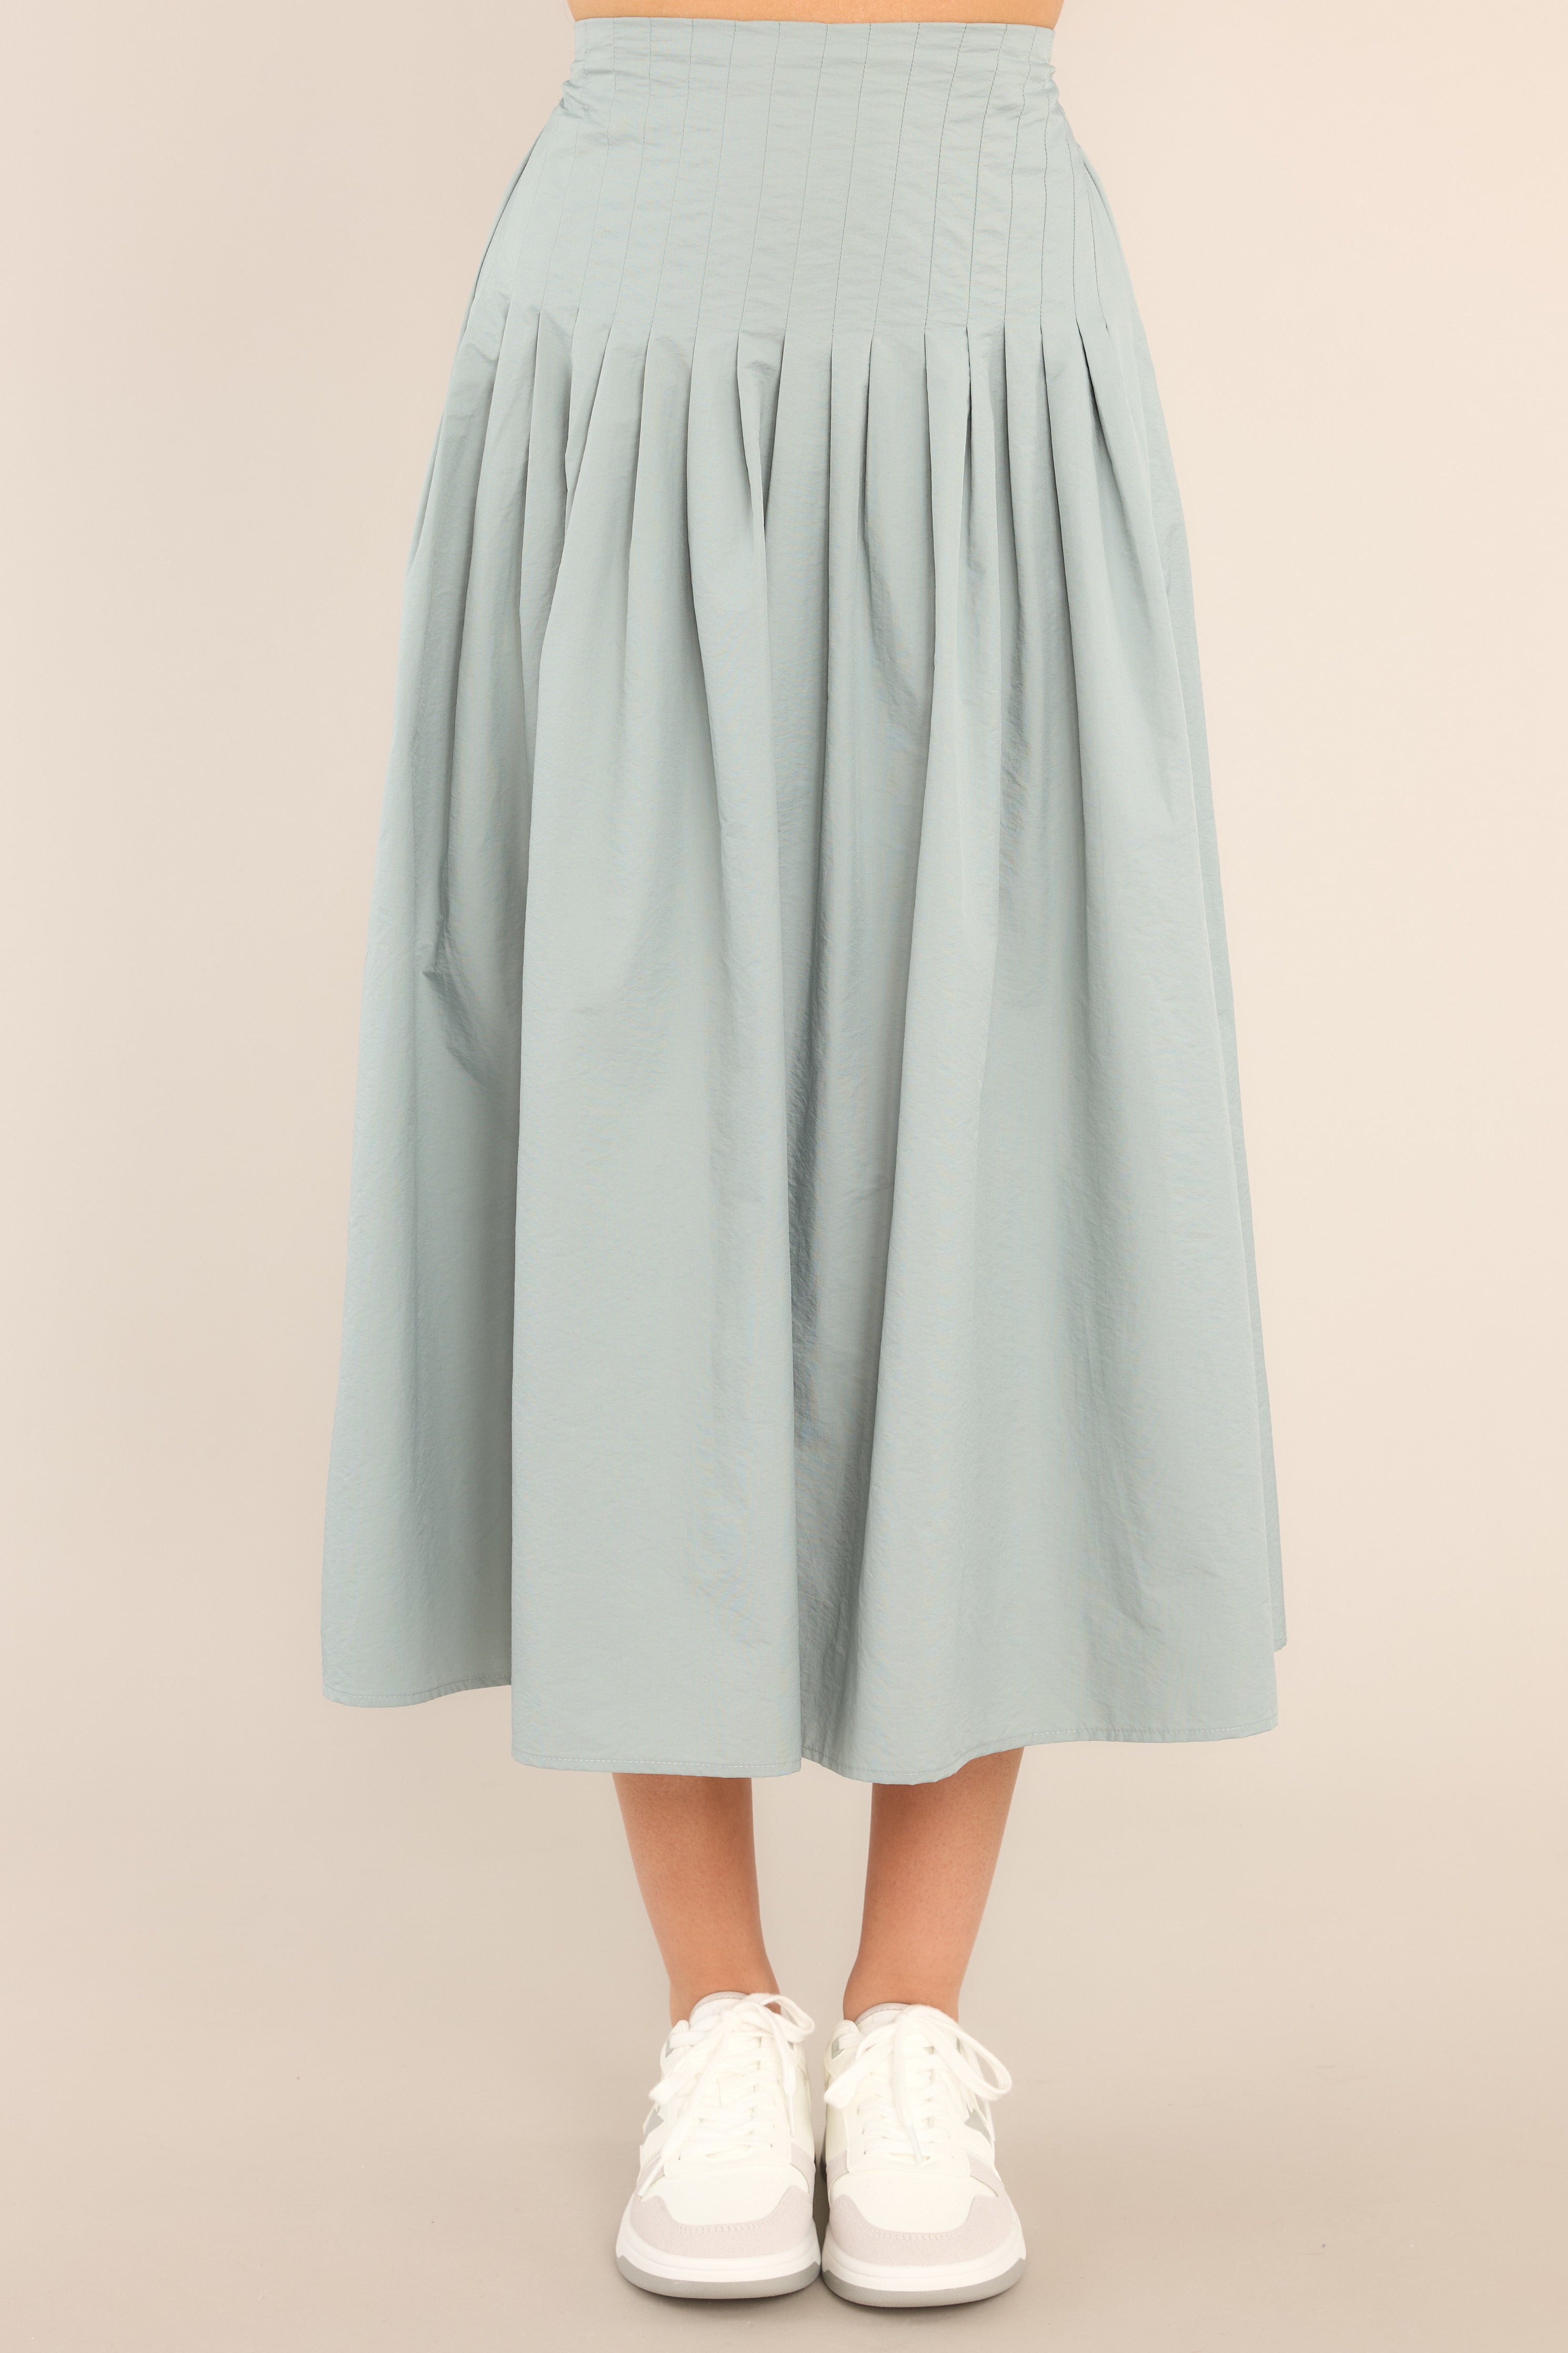 Full front view of this skirt that features a high waisted design, an elastic insert at the back of the waist, and intricate pleats around the hipline.